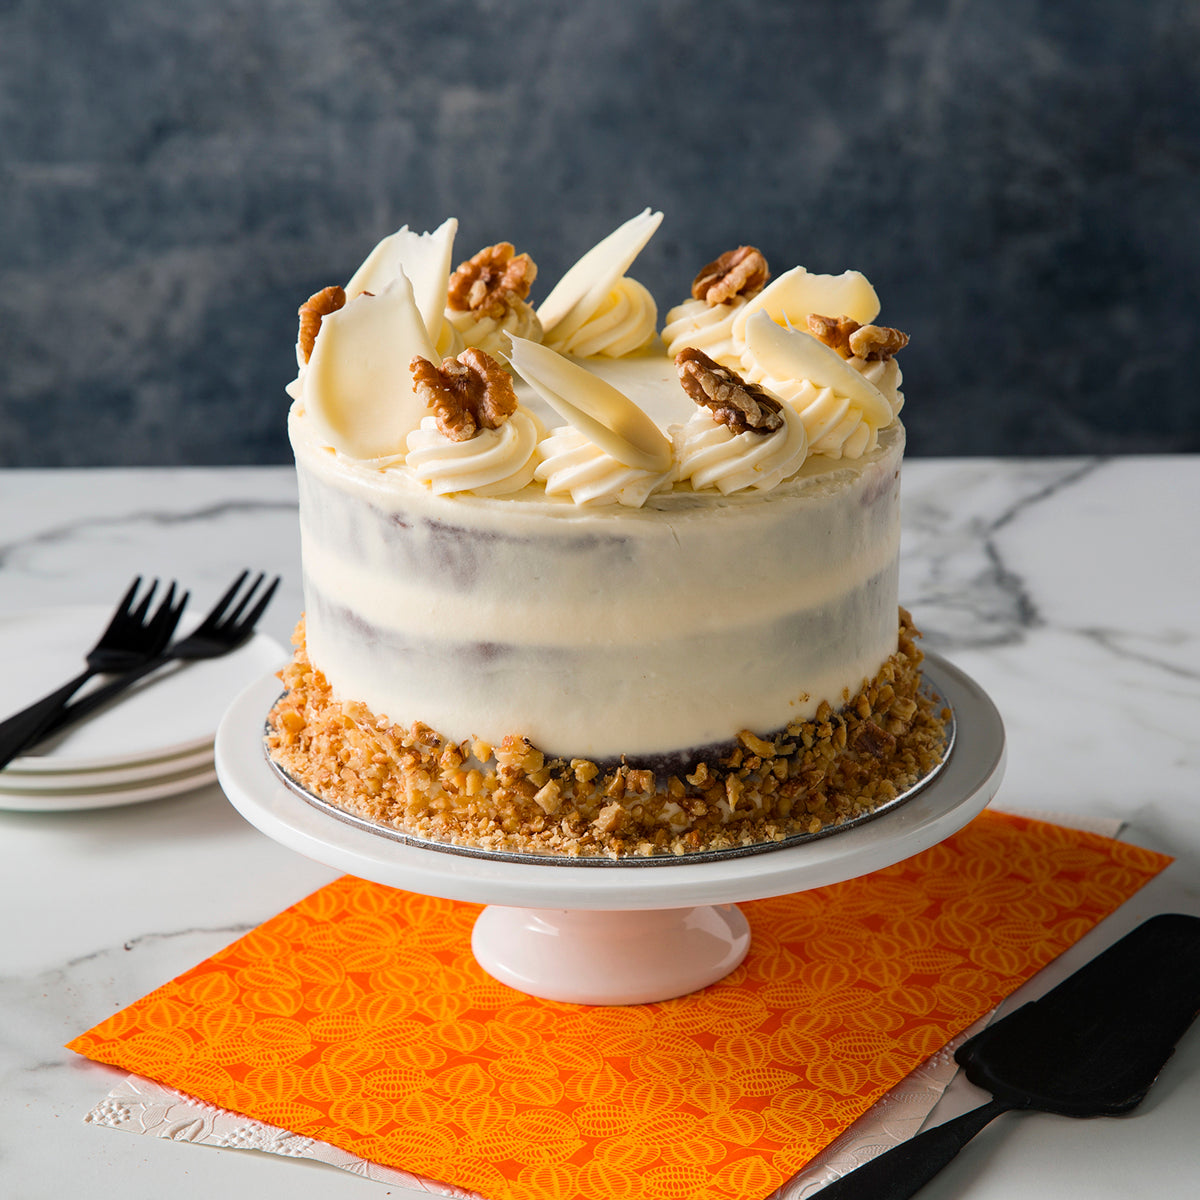 Classic Carrot Cake Recipe with Ginger Cream Cheese Frosting